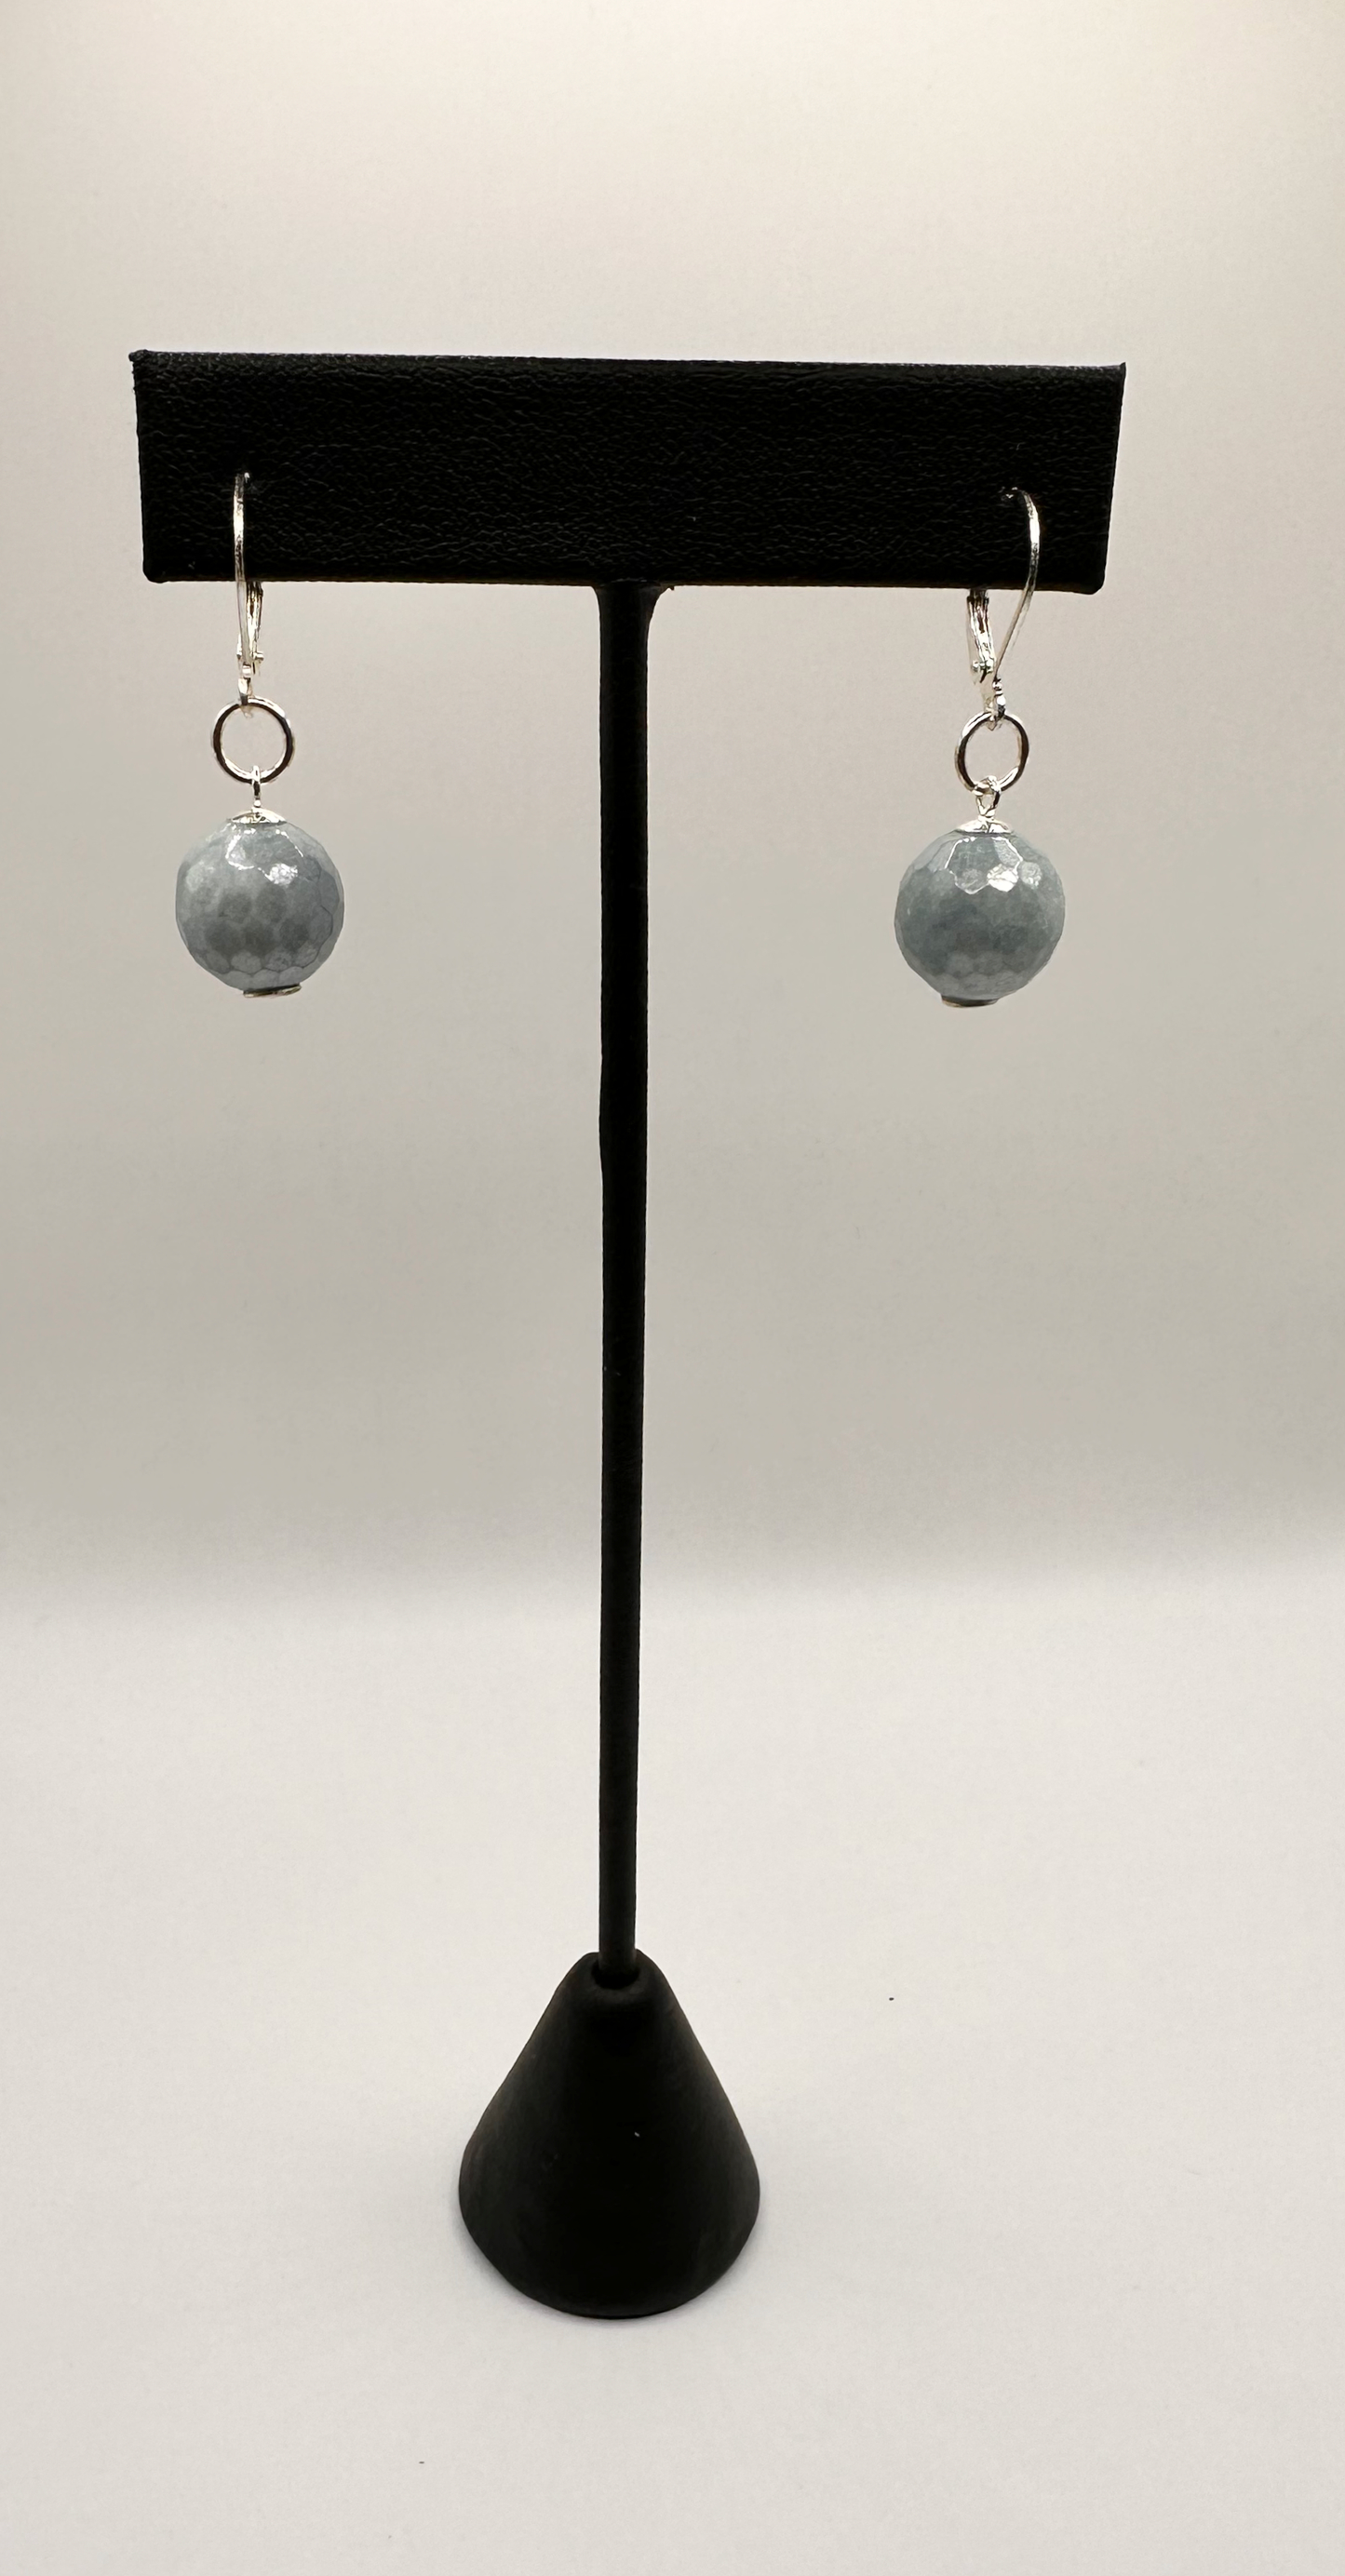 Chanel Style Iridescent with Sterling Silver Bead Drop Earrings